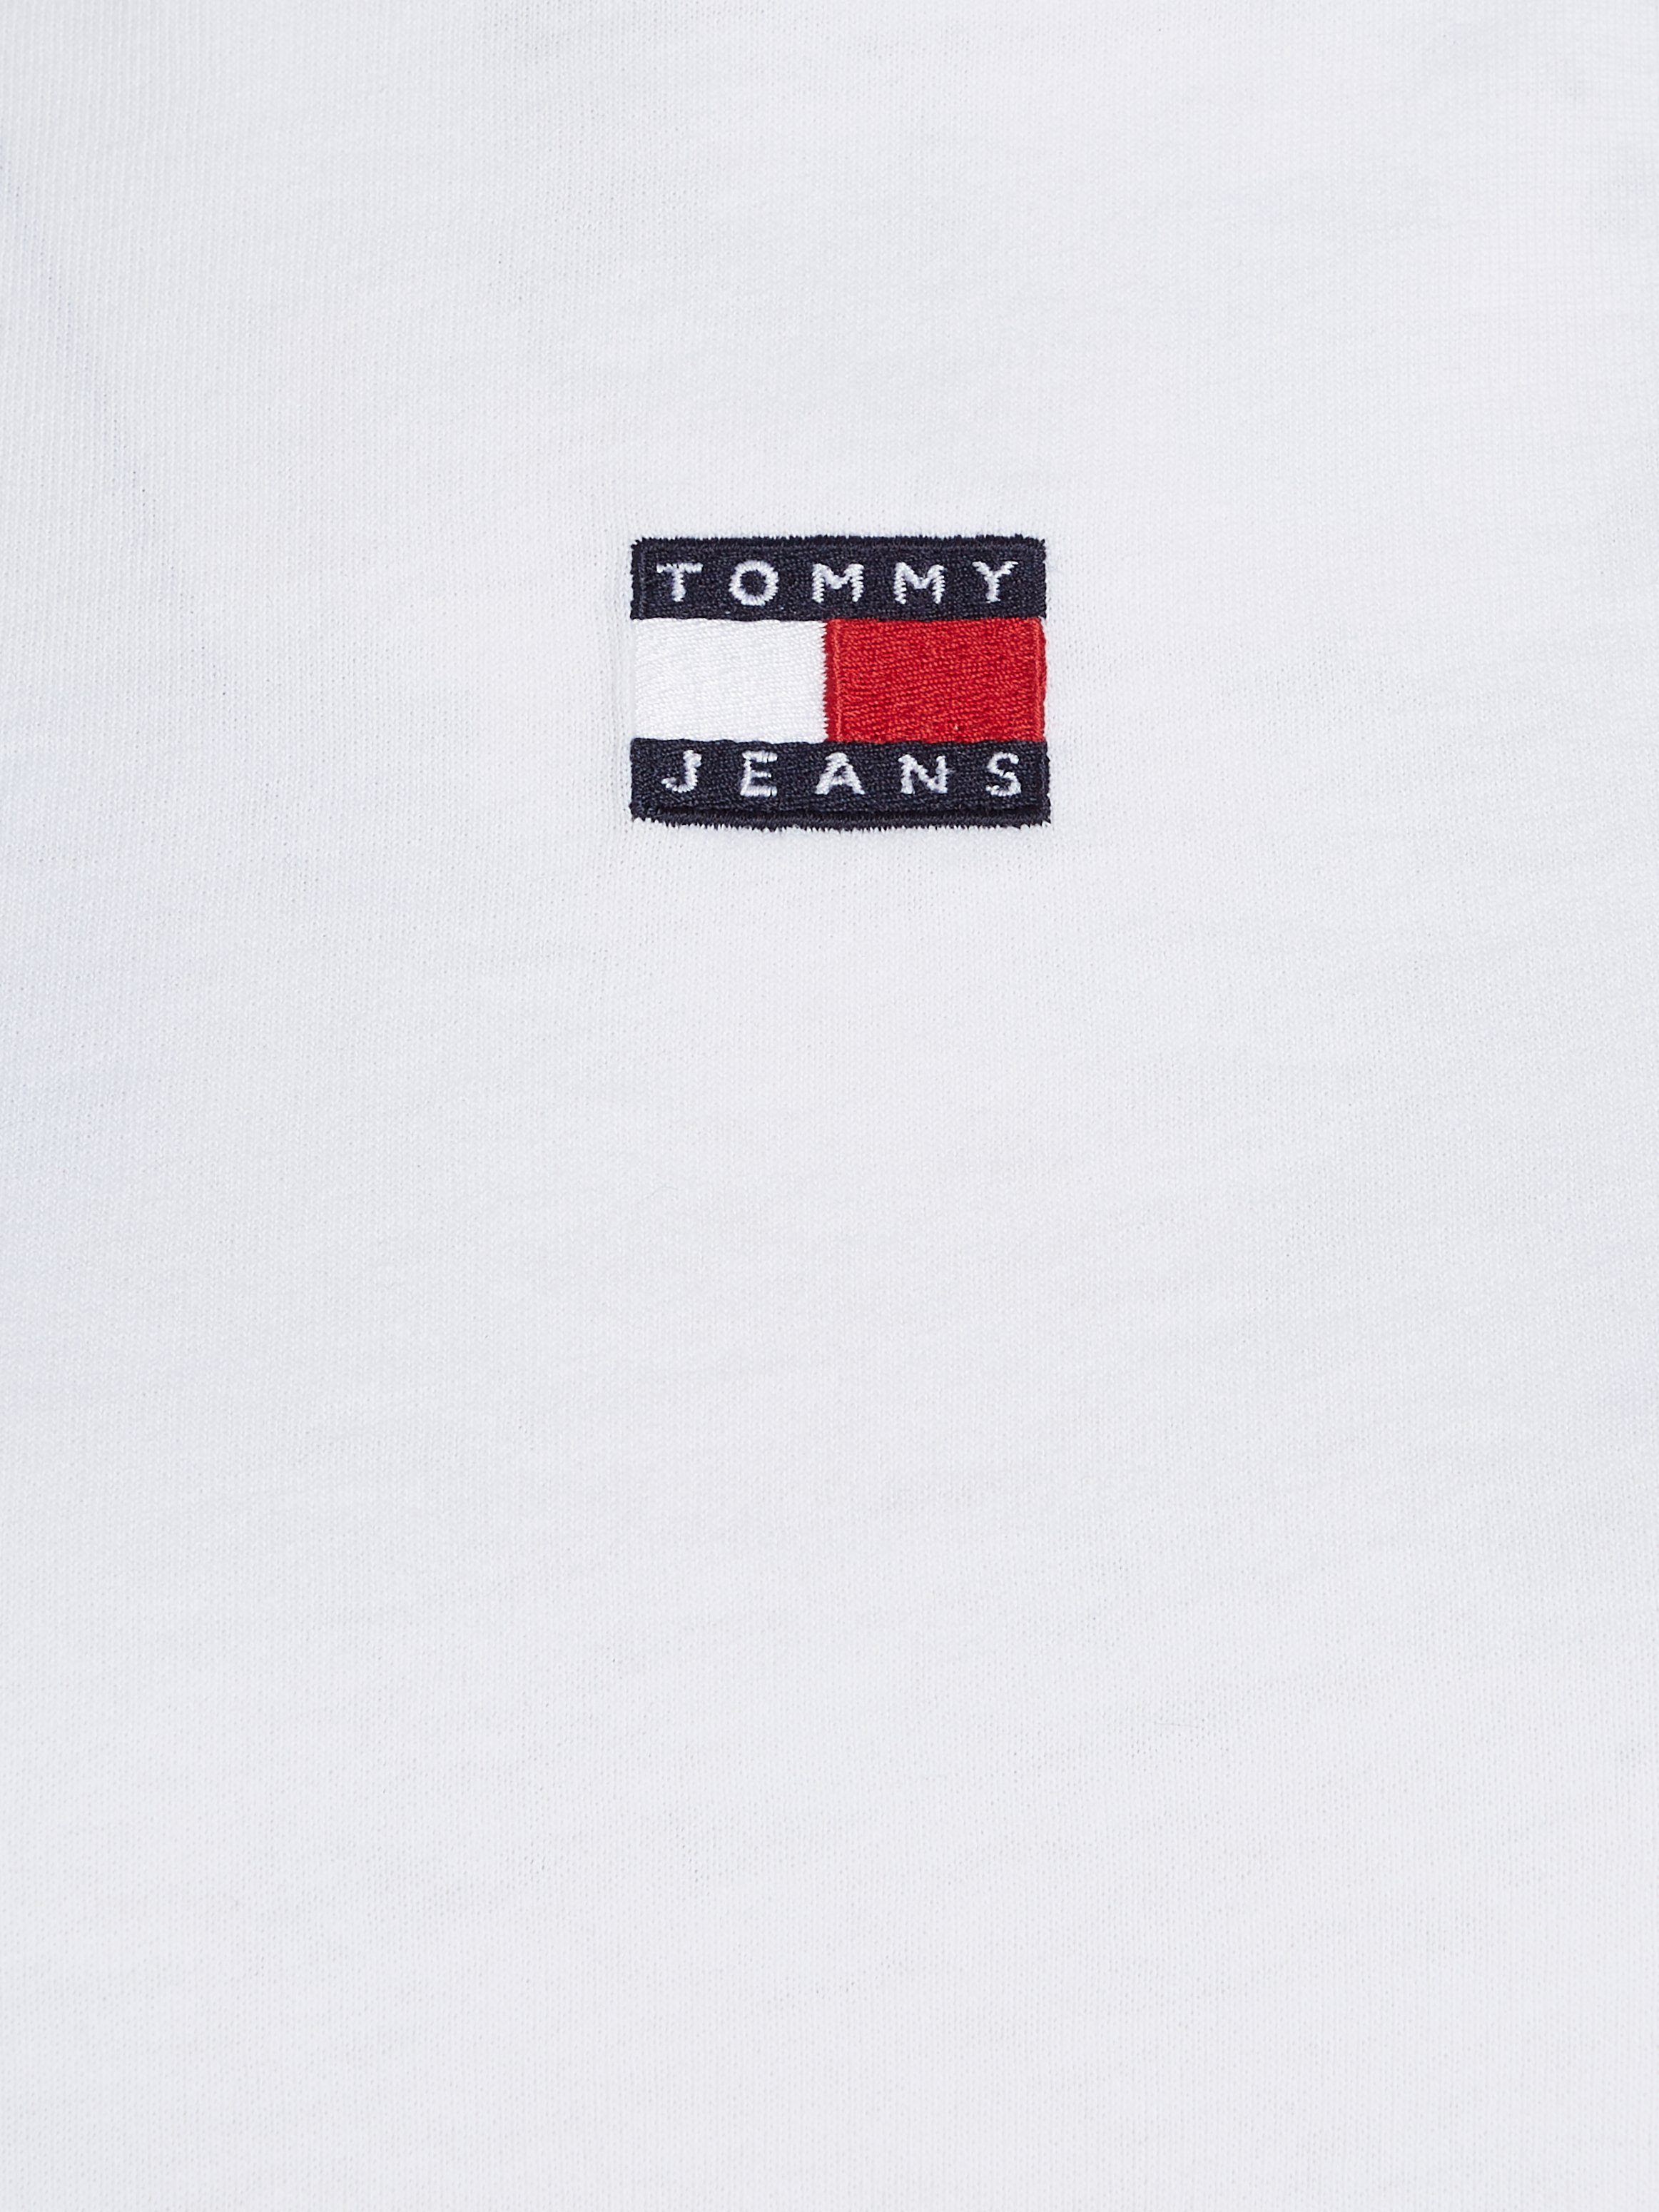 BADGE mit White TEE Jeans Tommy Logostickerei T-Shirt EXT BXY TJW